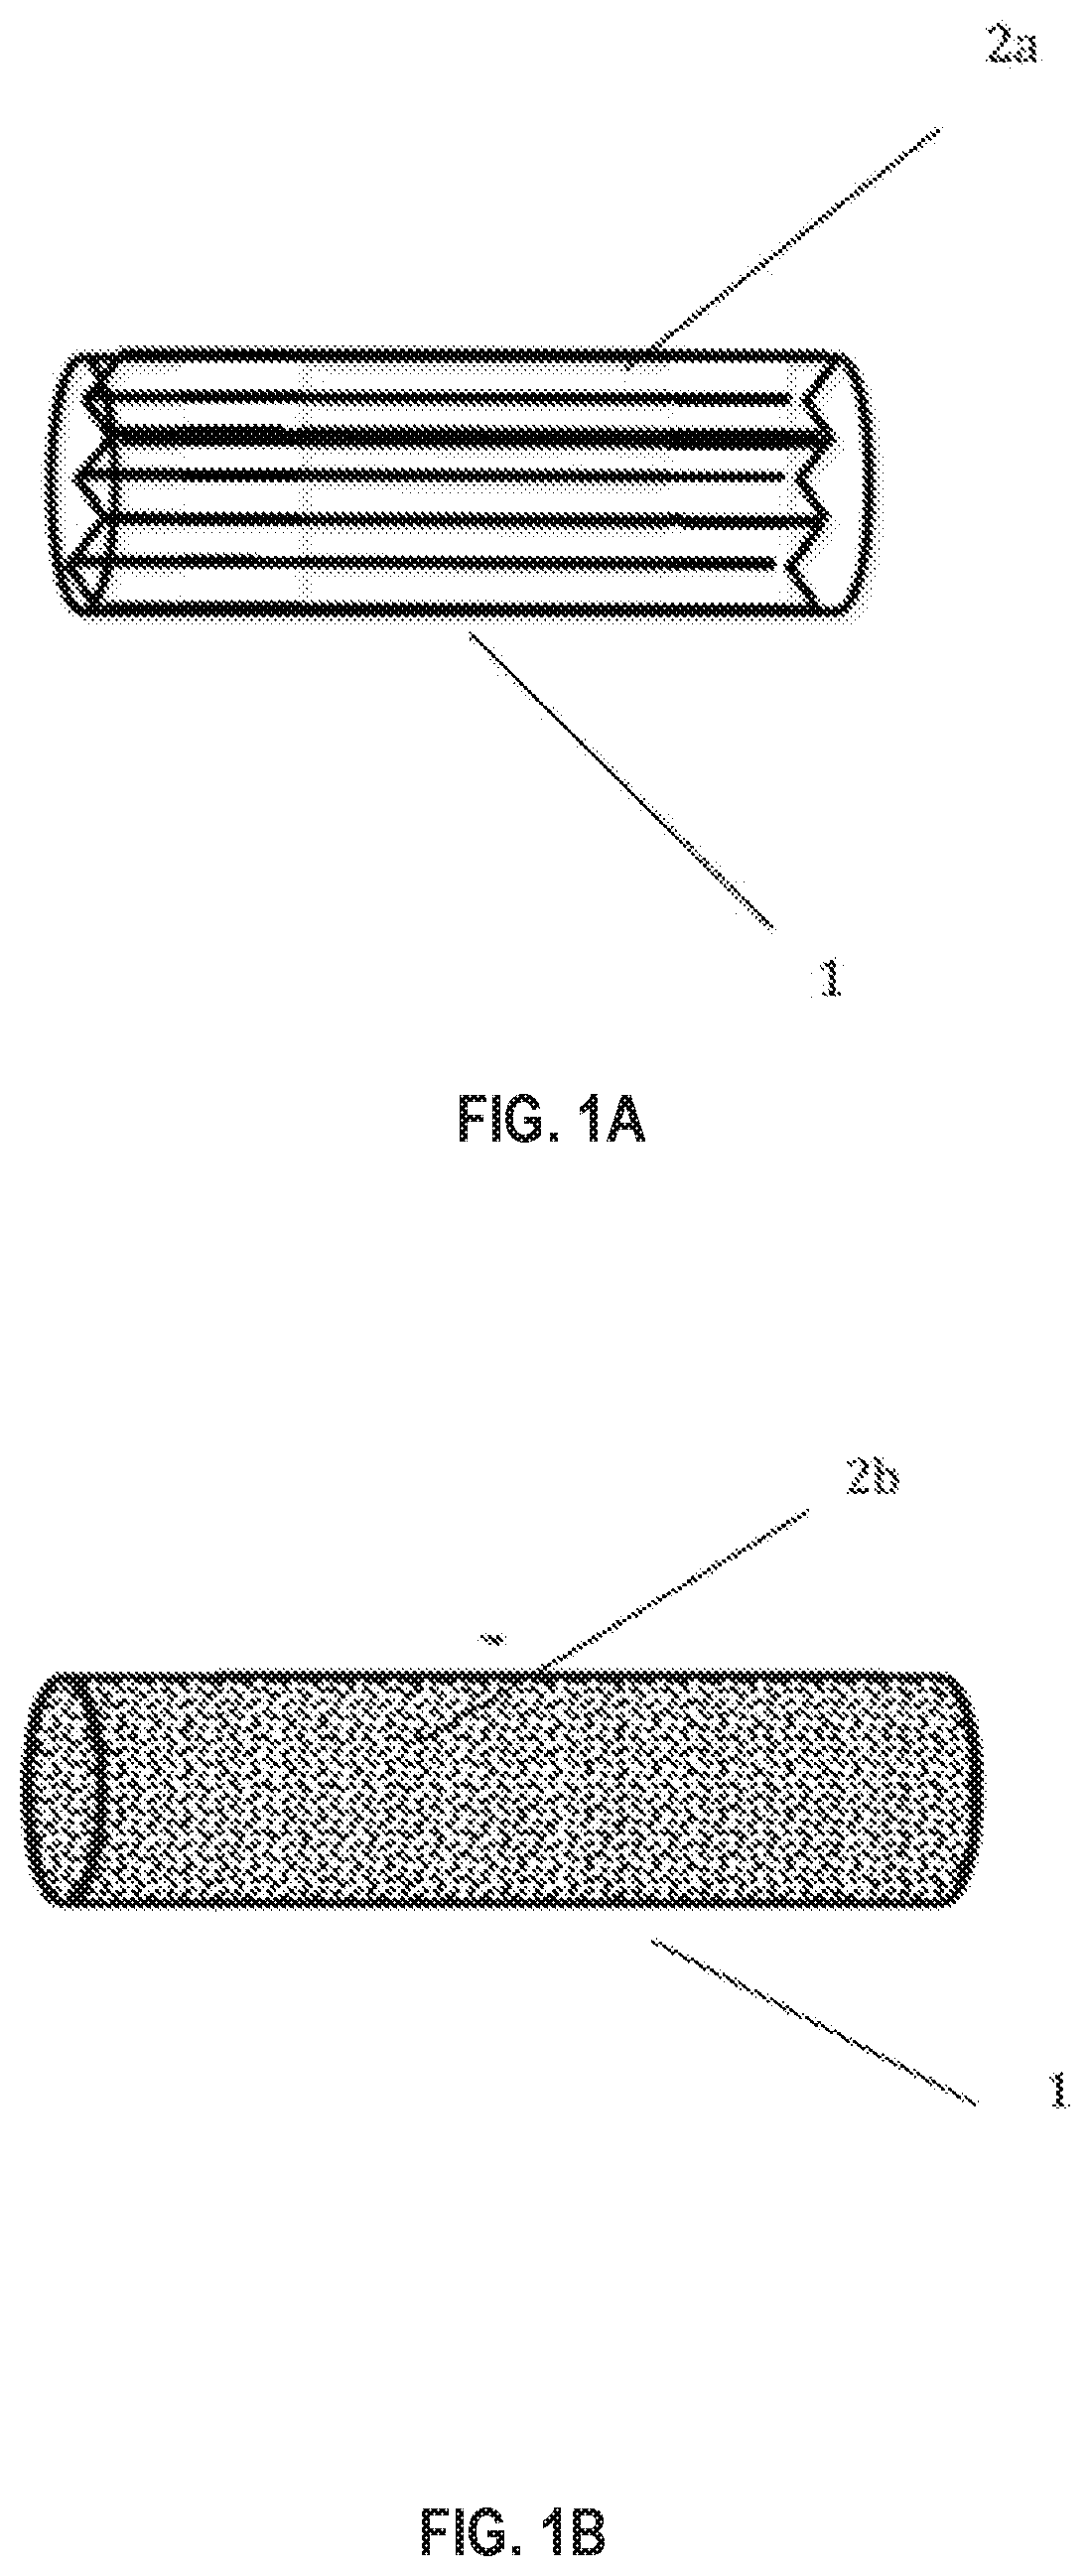 Adsorbent material for reducing hydrocarbon bleed emission in an evaporative emission control system